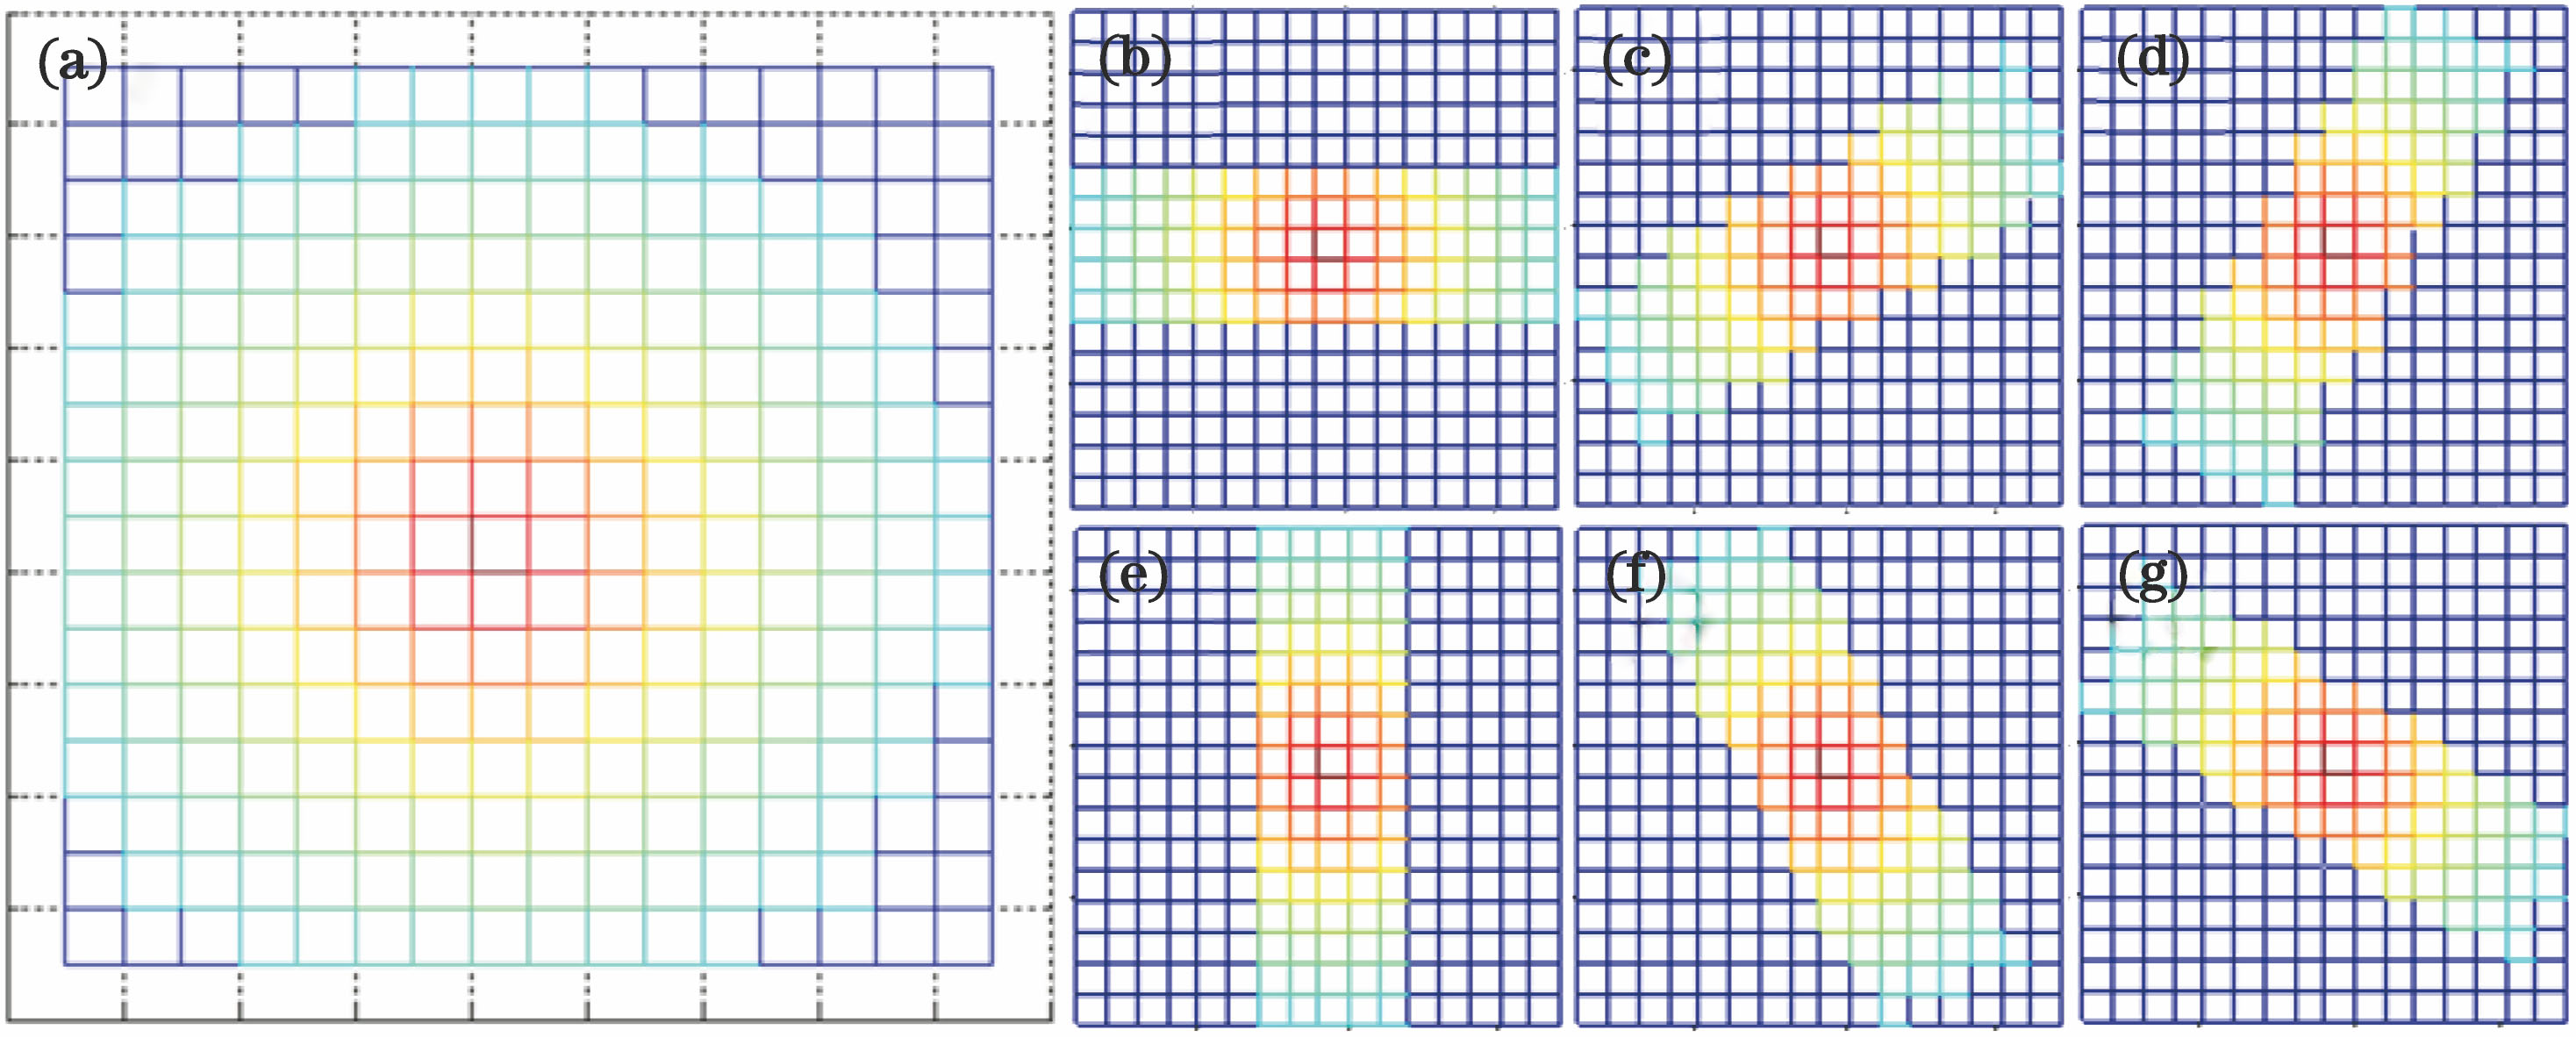 Design of six equal directional filters. (a) Distance weights of filters; (b)-(g) filters in six direction